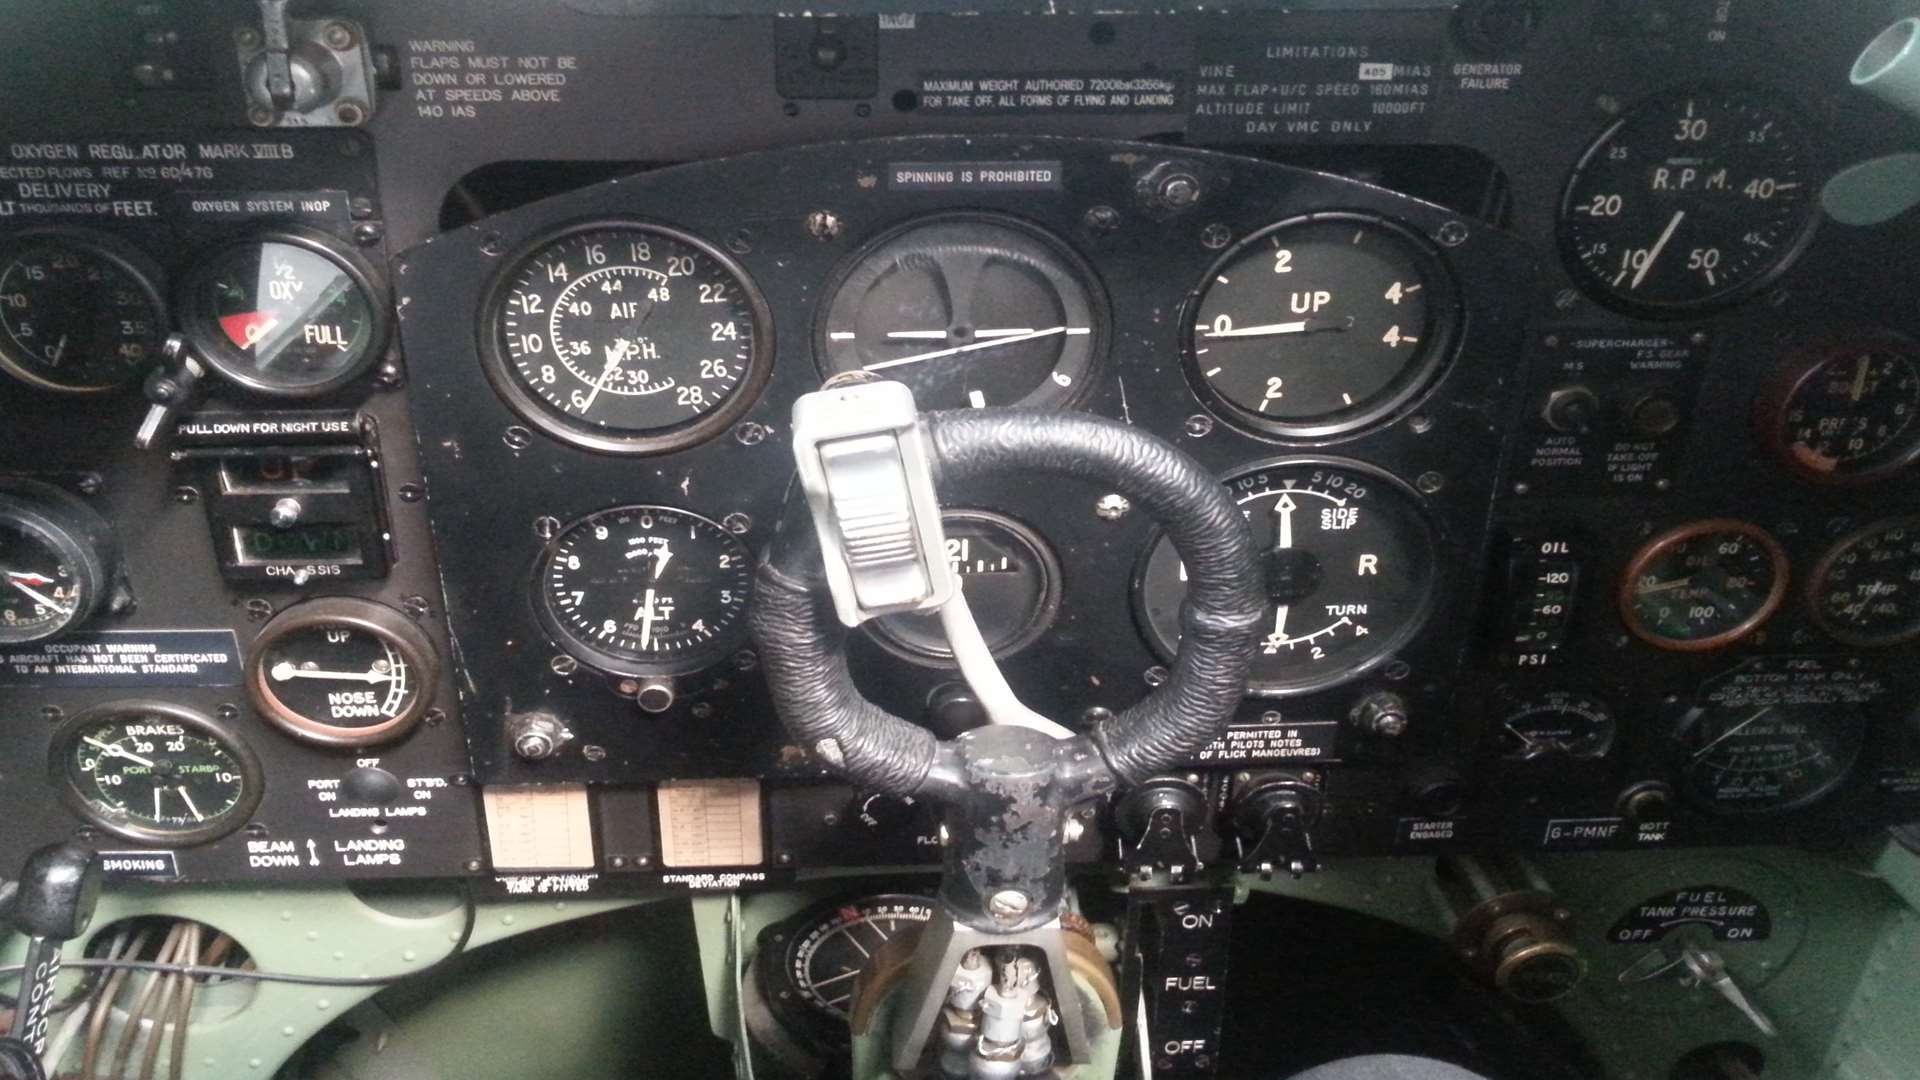 The controls of the Kent Spitfire